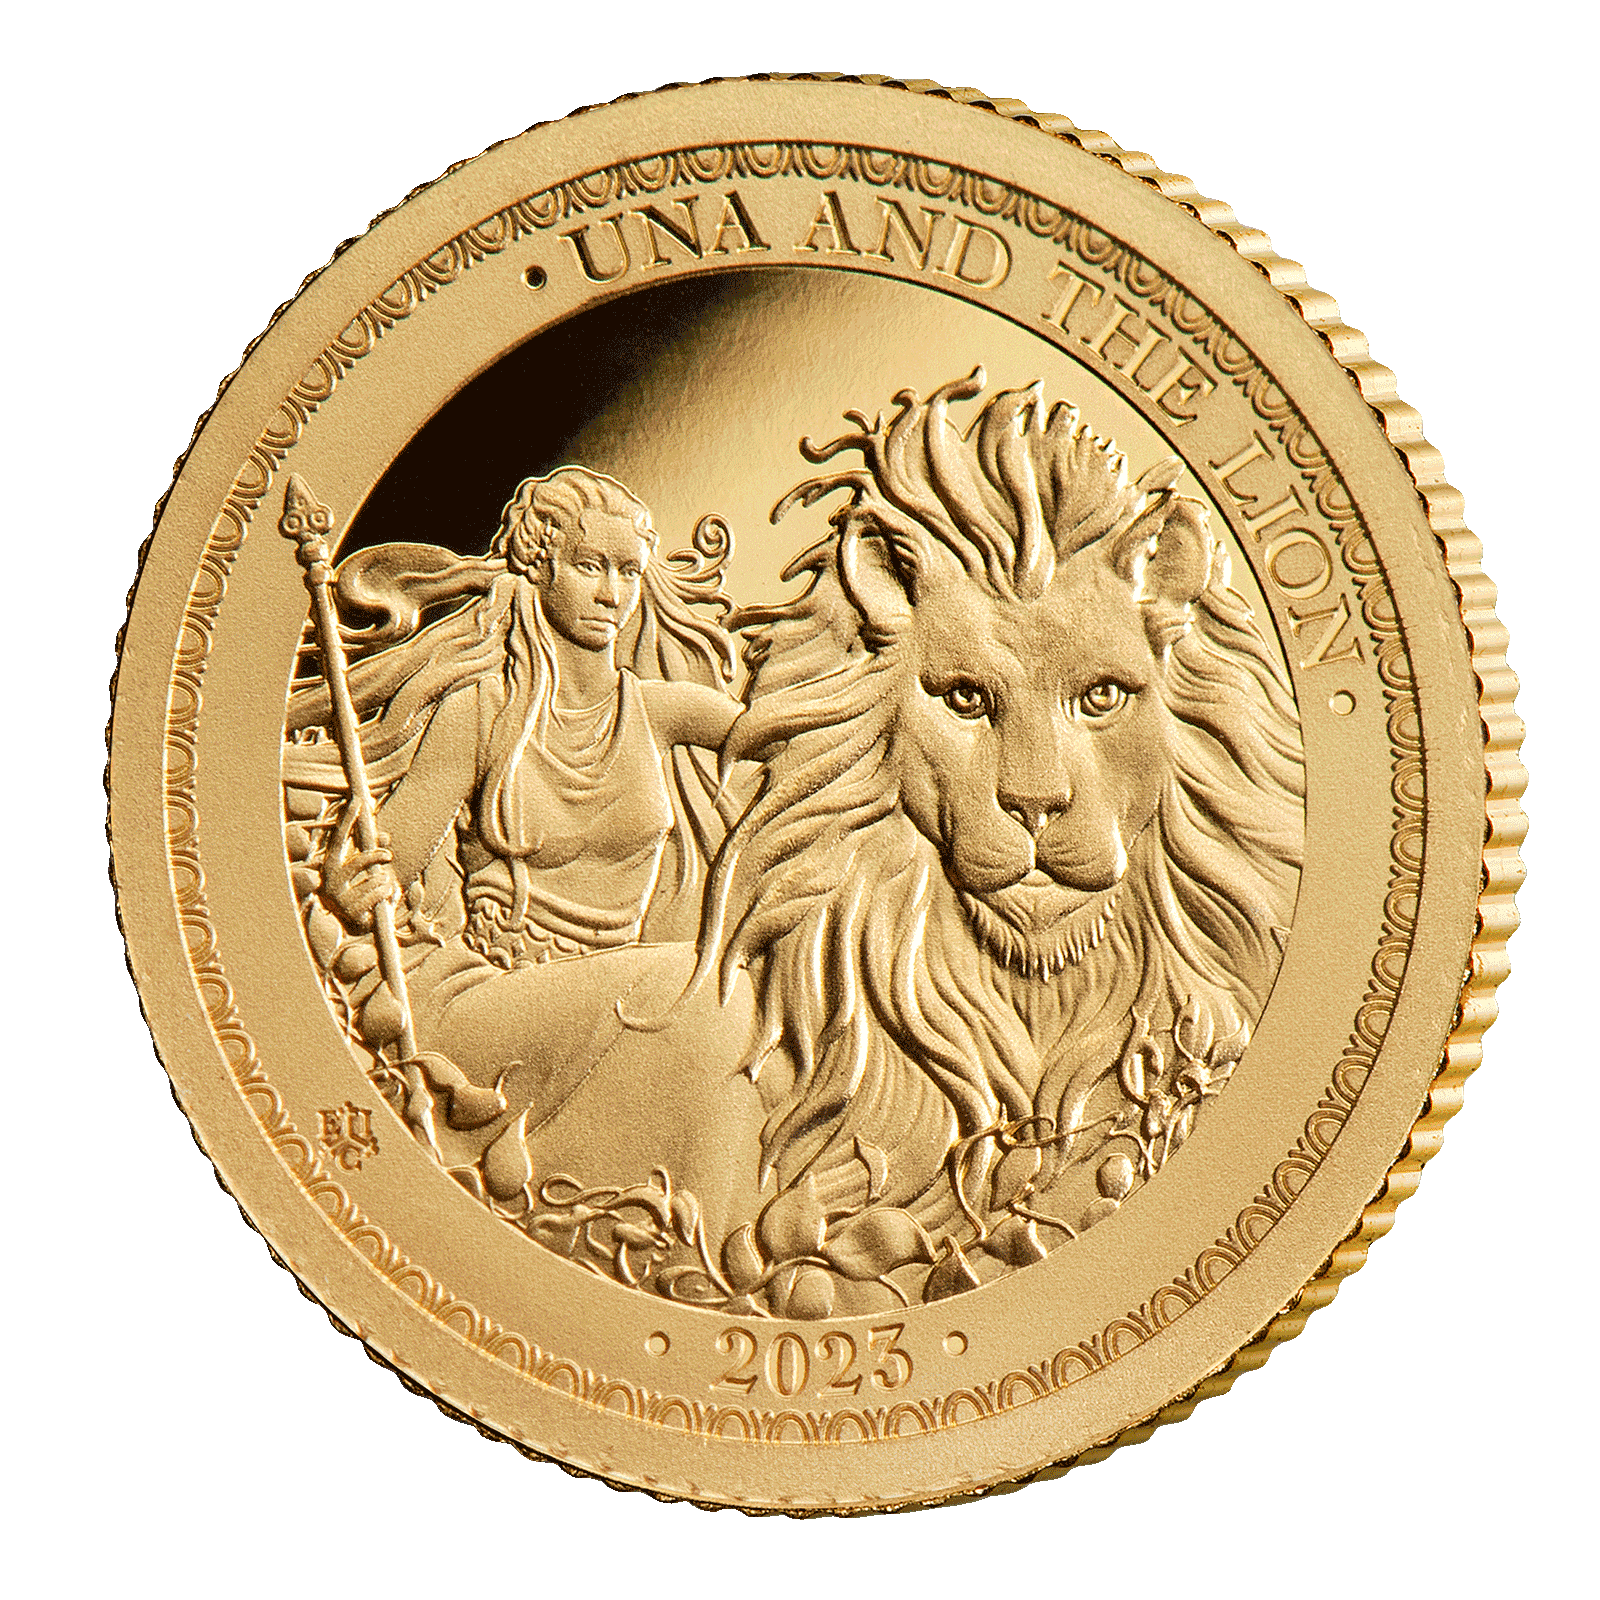 Una & The Lion 2023 0.5g Gold Proof Coin